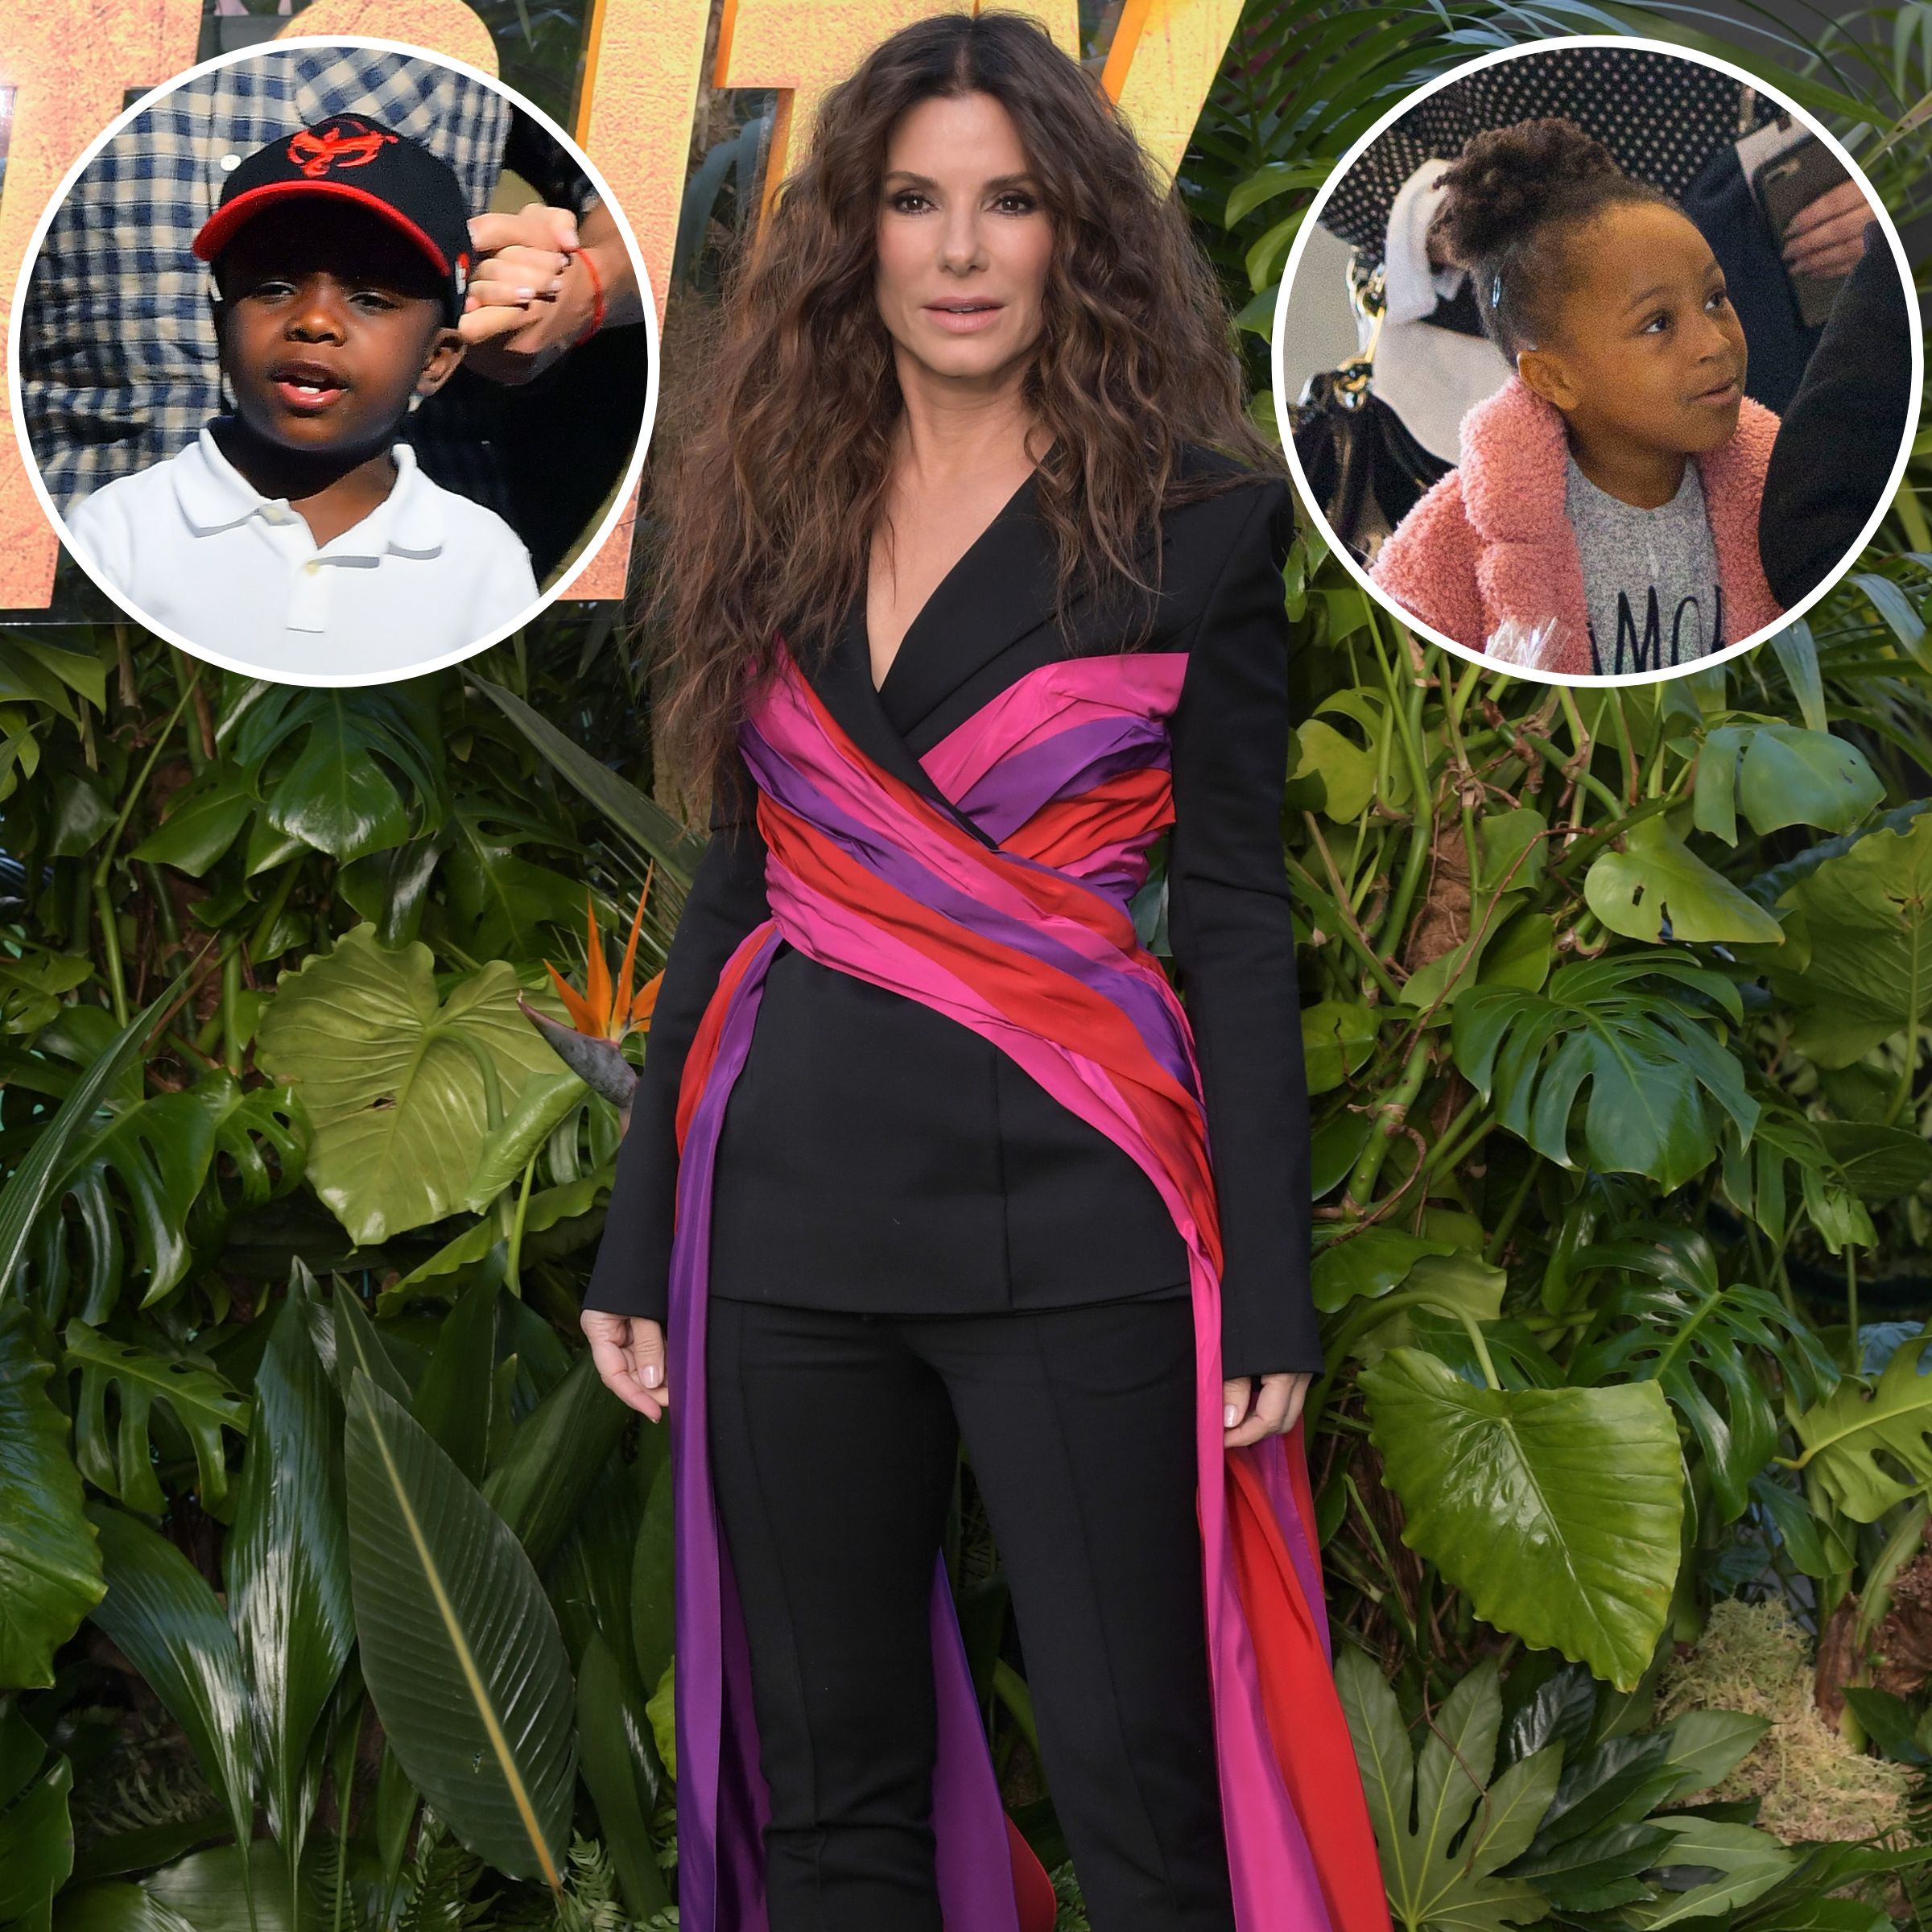 https://www.closerweekly.com/wp-content/uploads/2022/08/Sandra-Bullock-Kids-Meet-Her-Adopted-Children-Louis-and-Laila.jpg?quality=86&strip=all